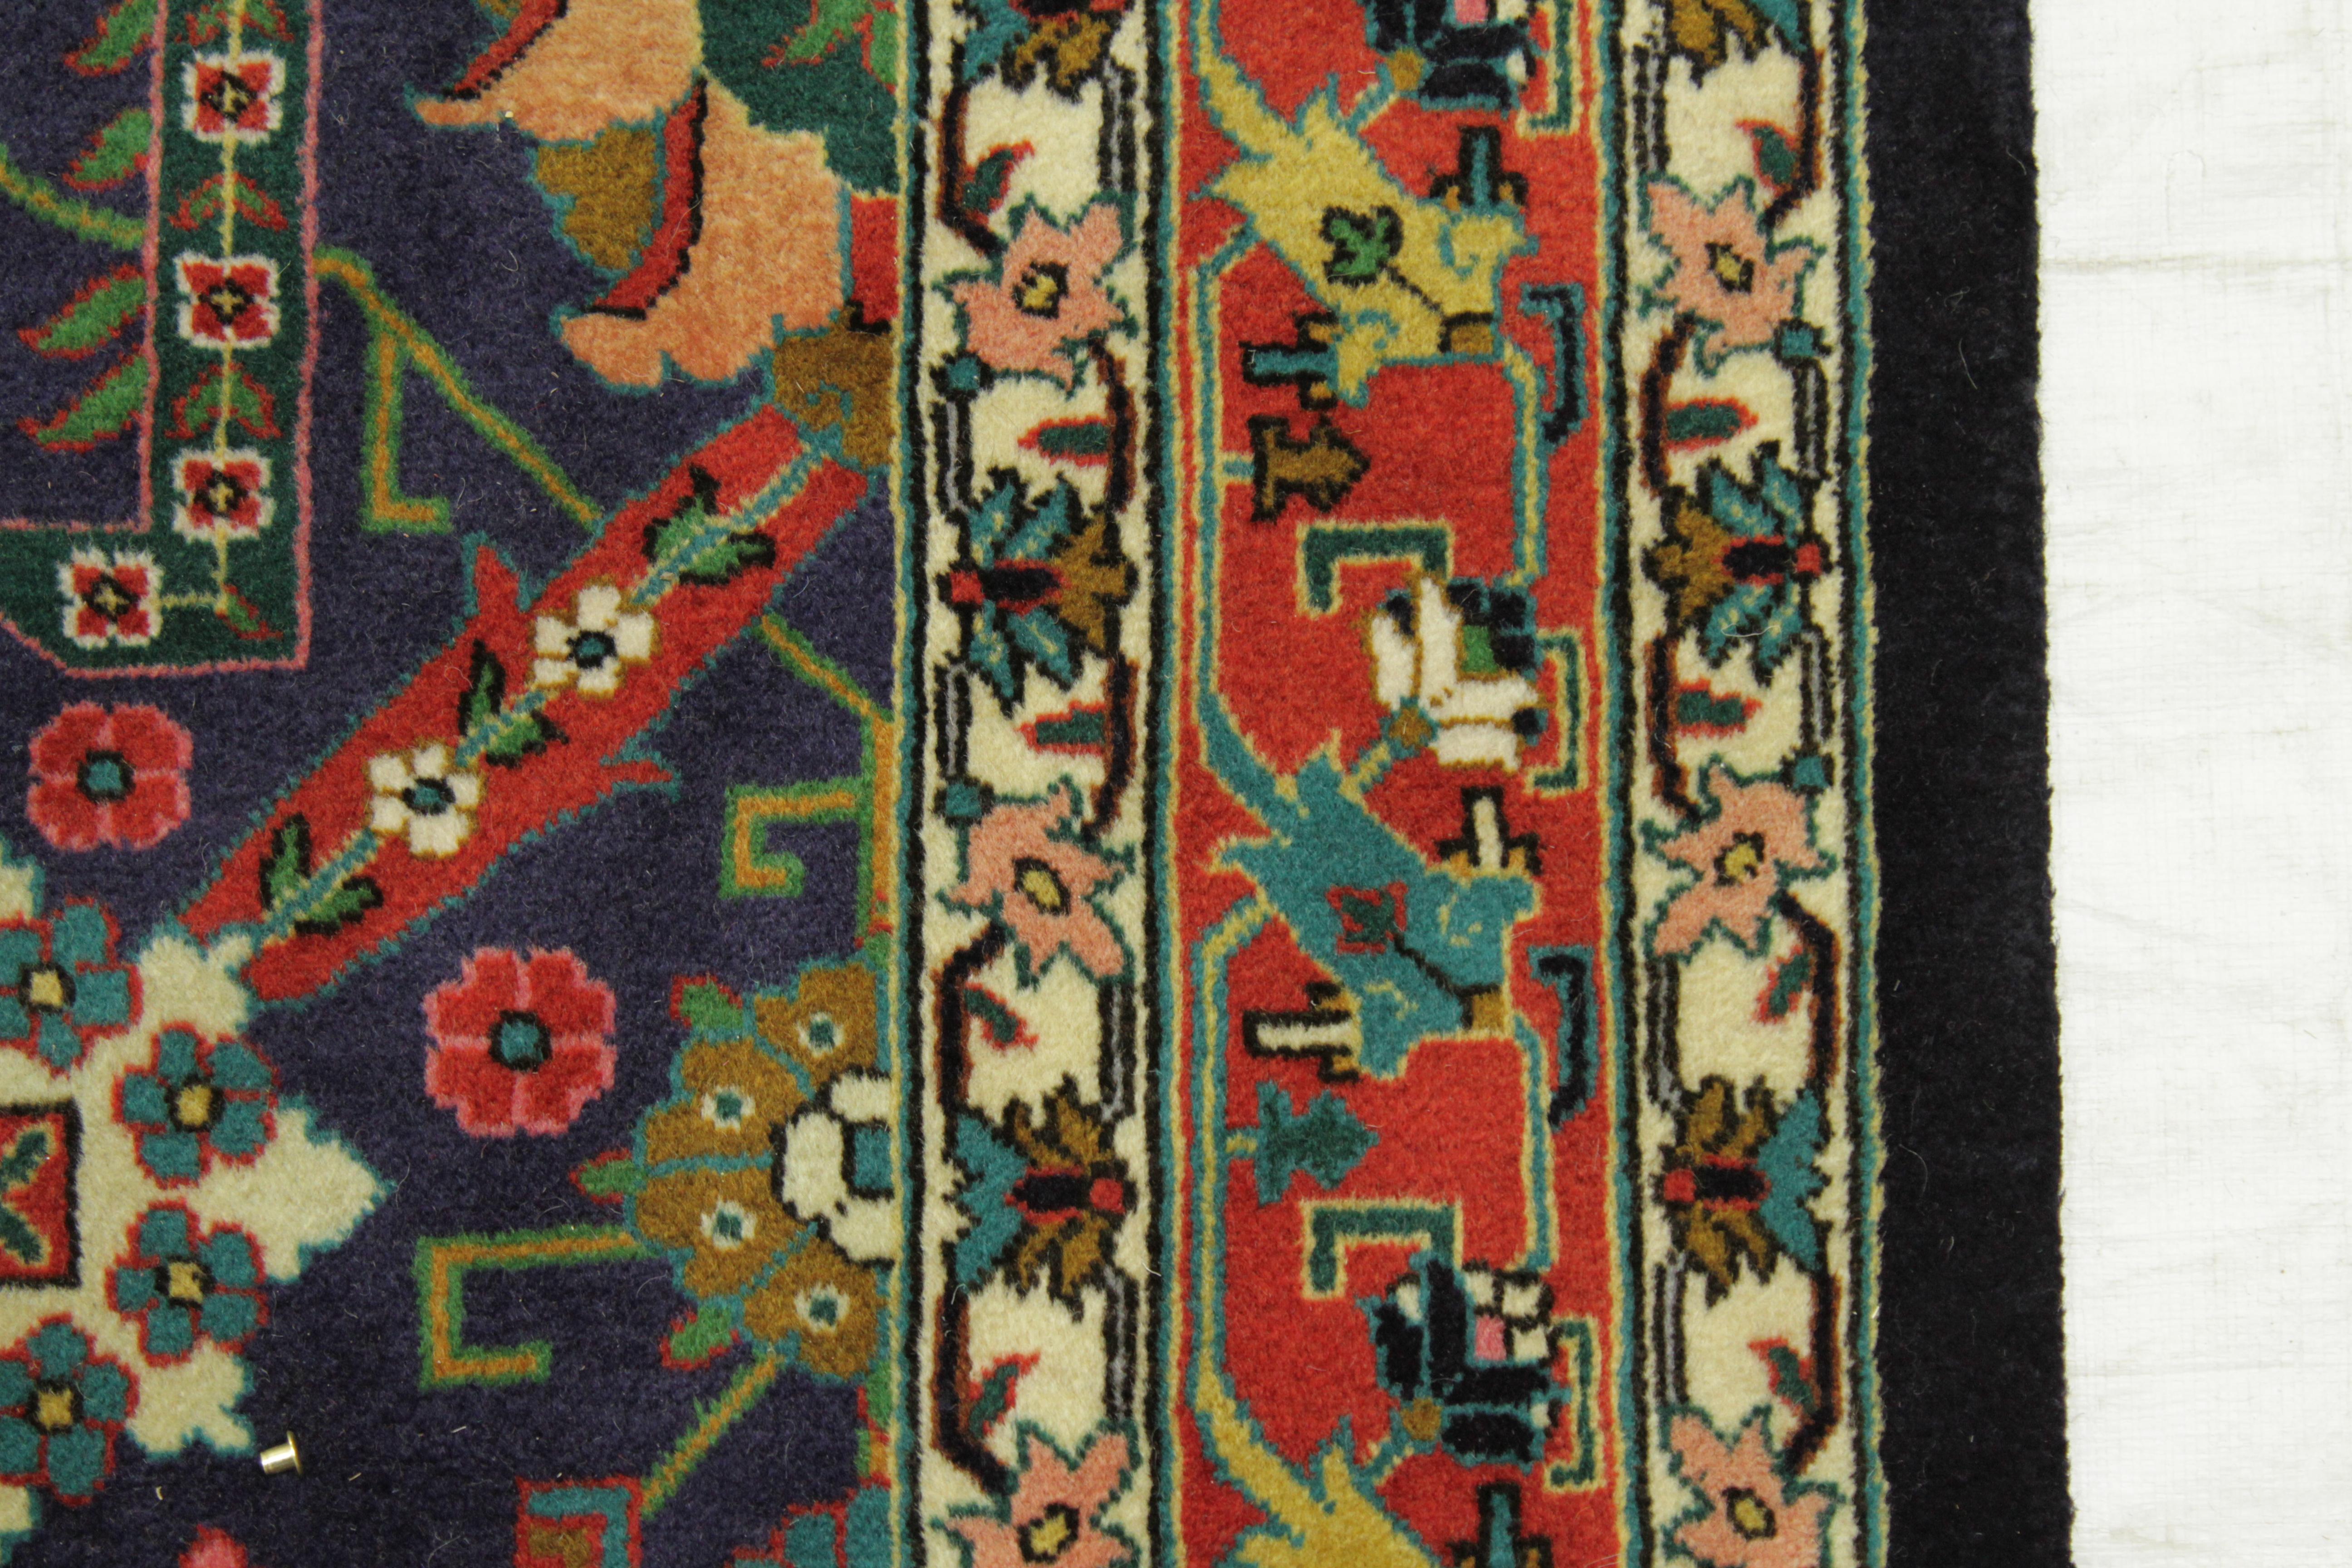 Twin Antique Turkish Rug Tabriz Style with Grand Floral Patterns, circa 1970s For Sale 2